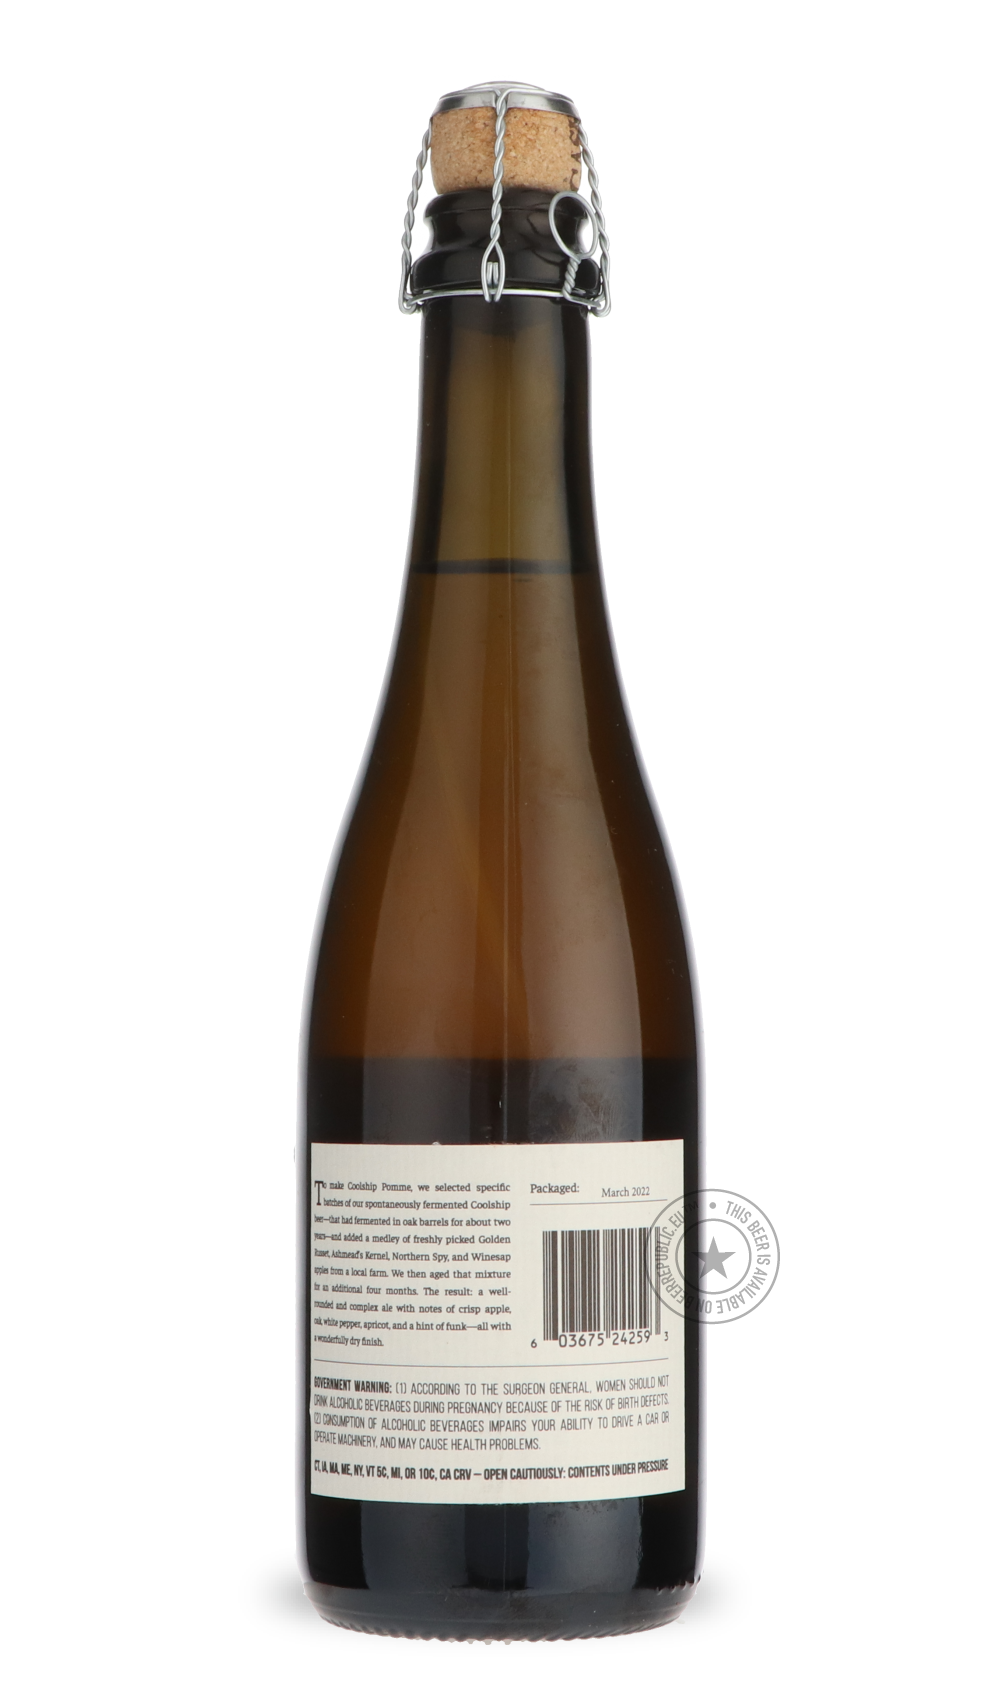 -Allagash- Coolship Pomme-Sour / Wild & Fruity- Only @ Beer Republic - The best online beer store for American & Canadian craft beer - Buy beer online from the USA and Canada - Bier online kopen - Amerikaans bier kopen - Craft beer store - Craft beer kopen - Amerikanisch bier kaufen - Bier online kaufen - Acheter biere online - IPA - Stout - Porter - New England IPA - Hazy IPA - Imperial Stout - Barrel Aged - Barrel Aged Imperial Stout - Brown - Dark beer - Blond - Blonde - Pilsner - Lager - Wheat - Weizen 